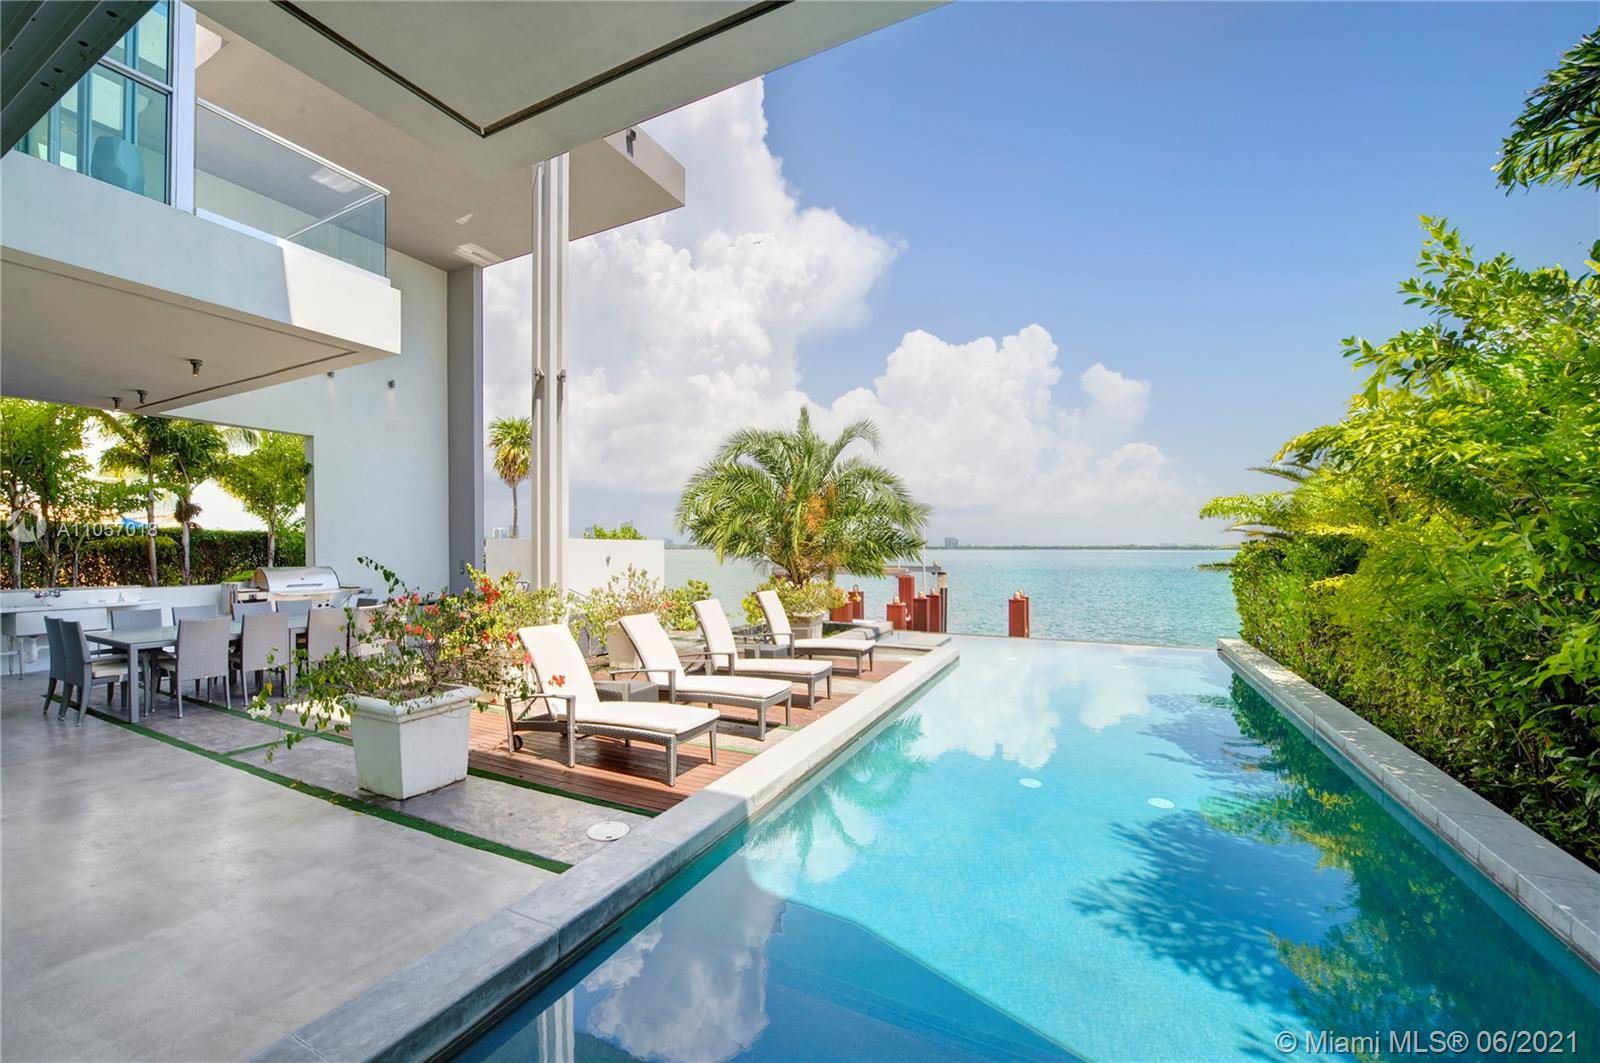 Luxury modern waterfront home on Venetian Islands with soaring ceilings and walls of glass taking in the magnificent wide bay views in every direction !